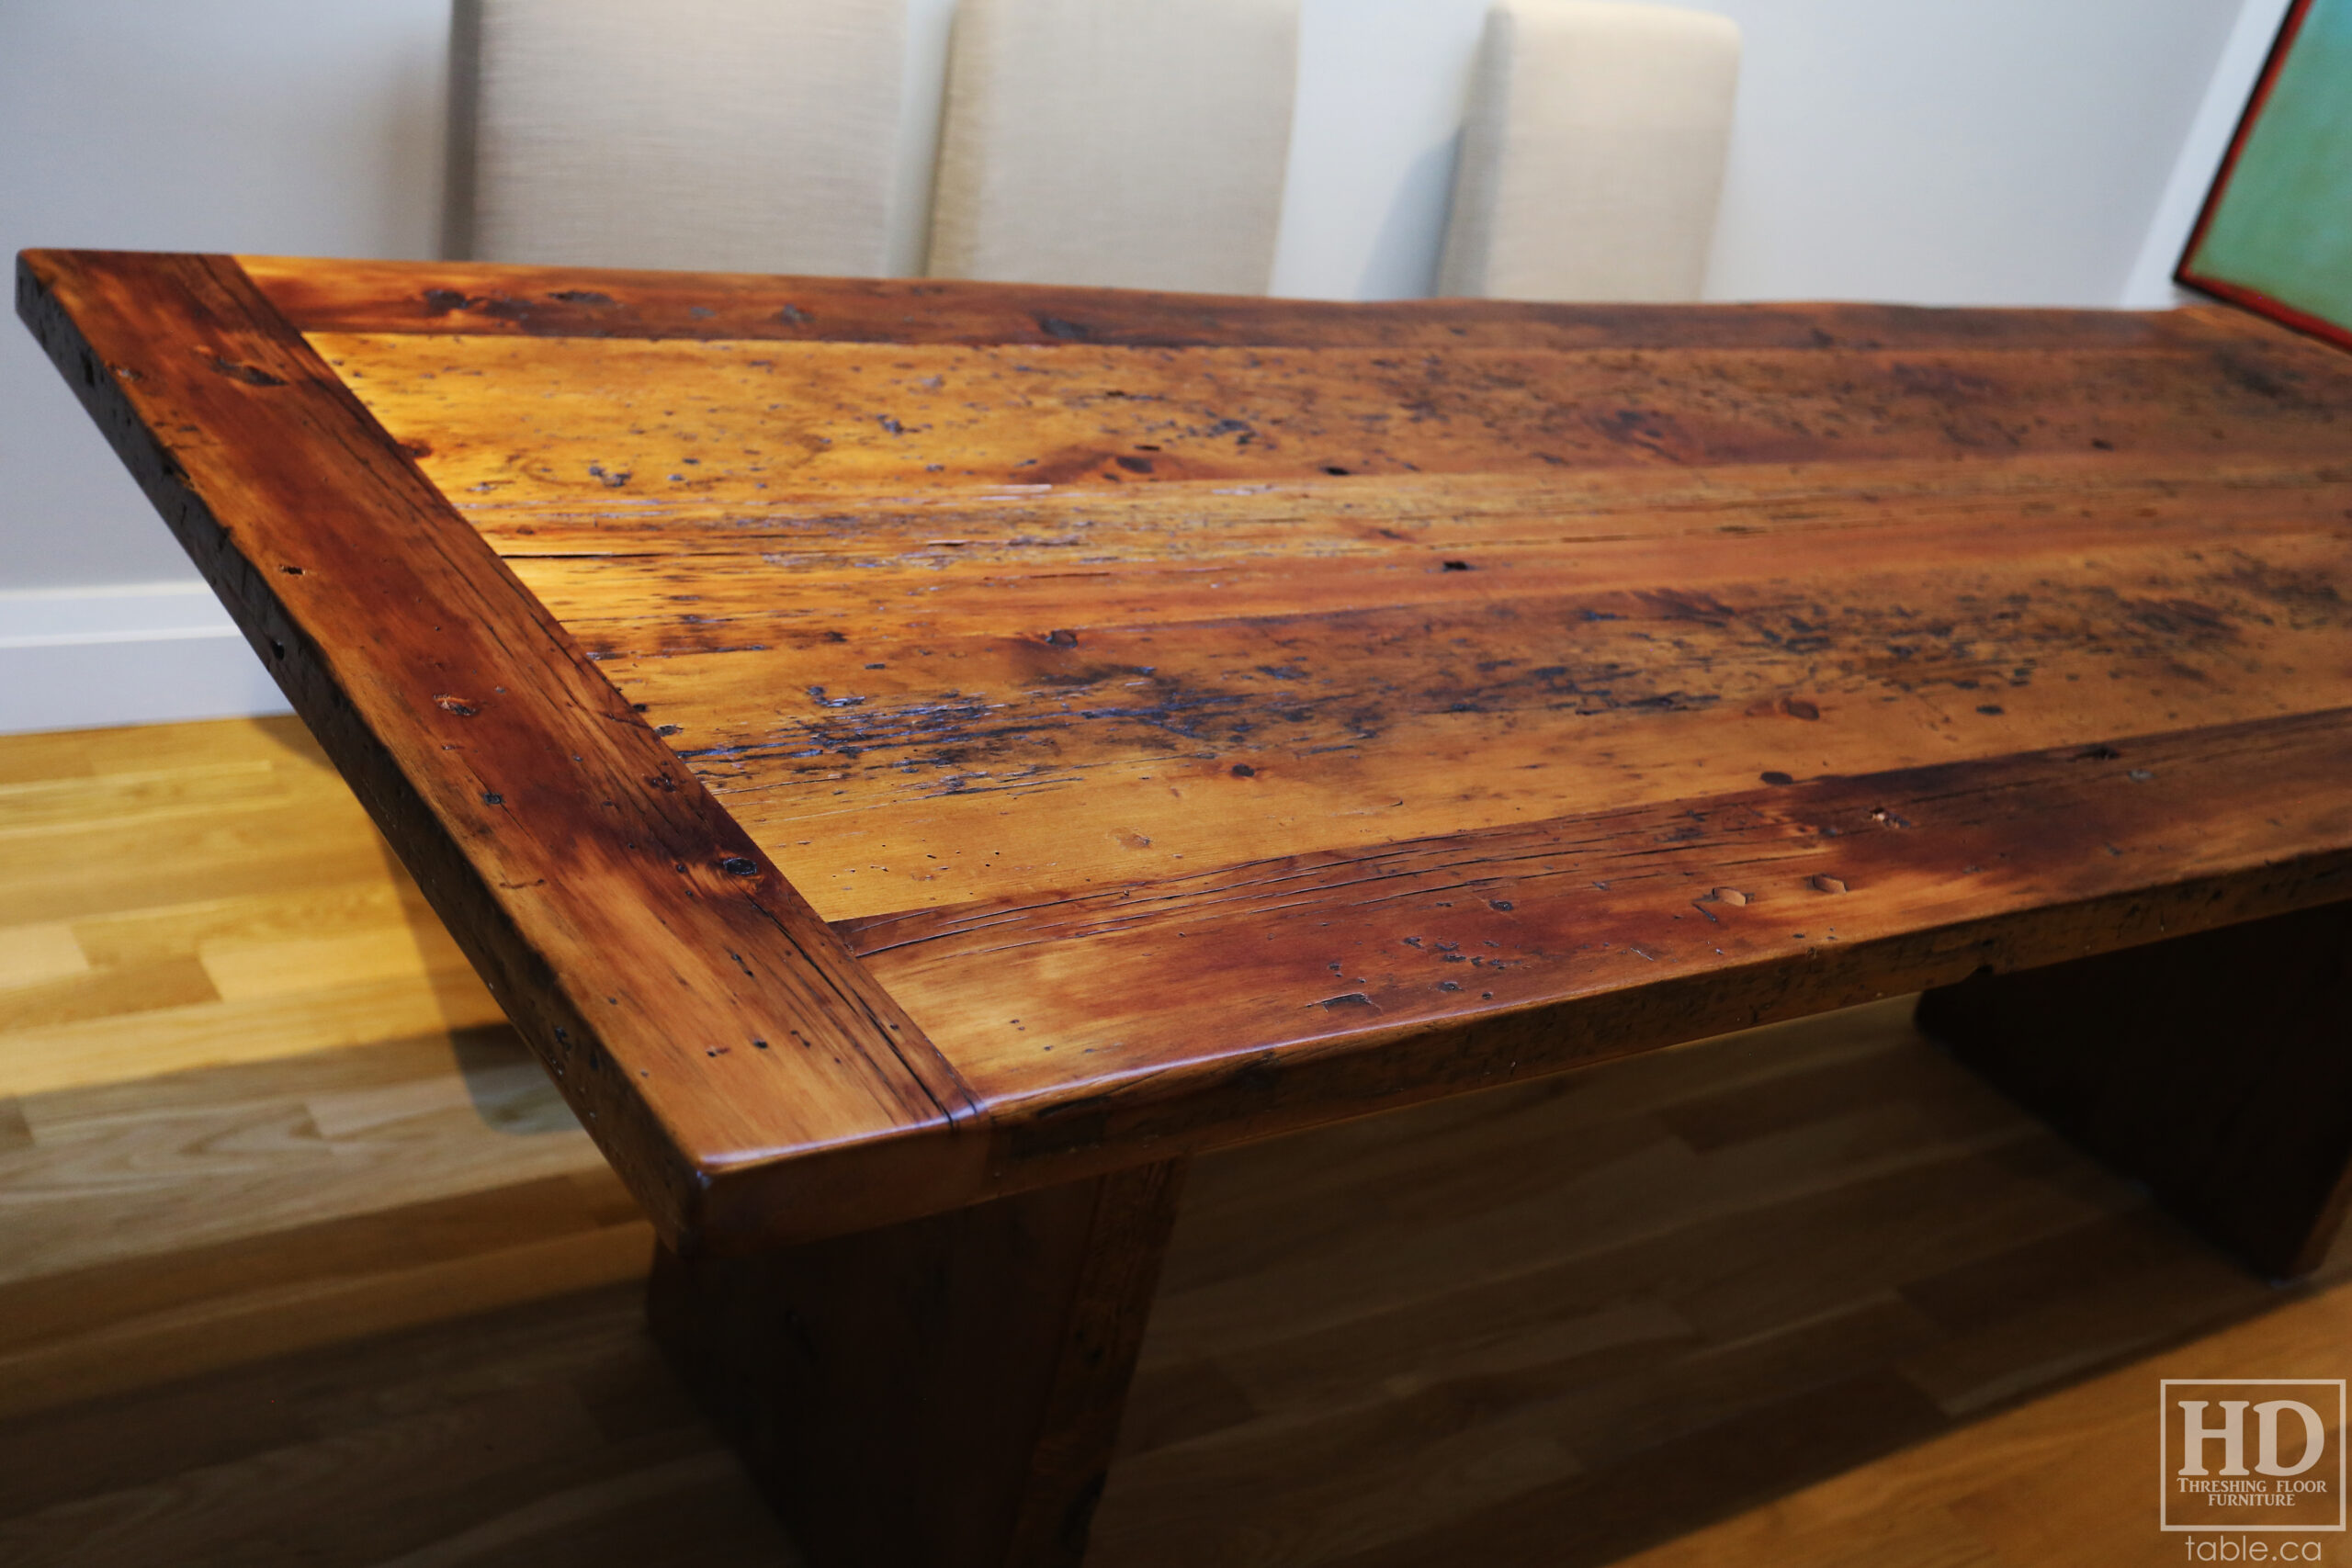 8' Ontario Barnwood Wood Table we made for an Oakville, Ontario home - 39" wide – Modern Plank Base – Reclaimed Old Growth Hemlock Threshing Floor Construction - Original edges & distressing maintained – Satin polyurethane finish [no epoxy filling] – www.table.ca